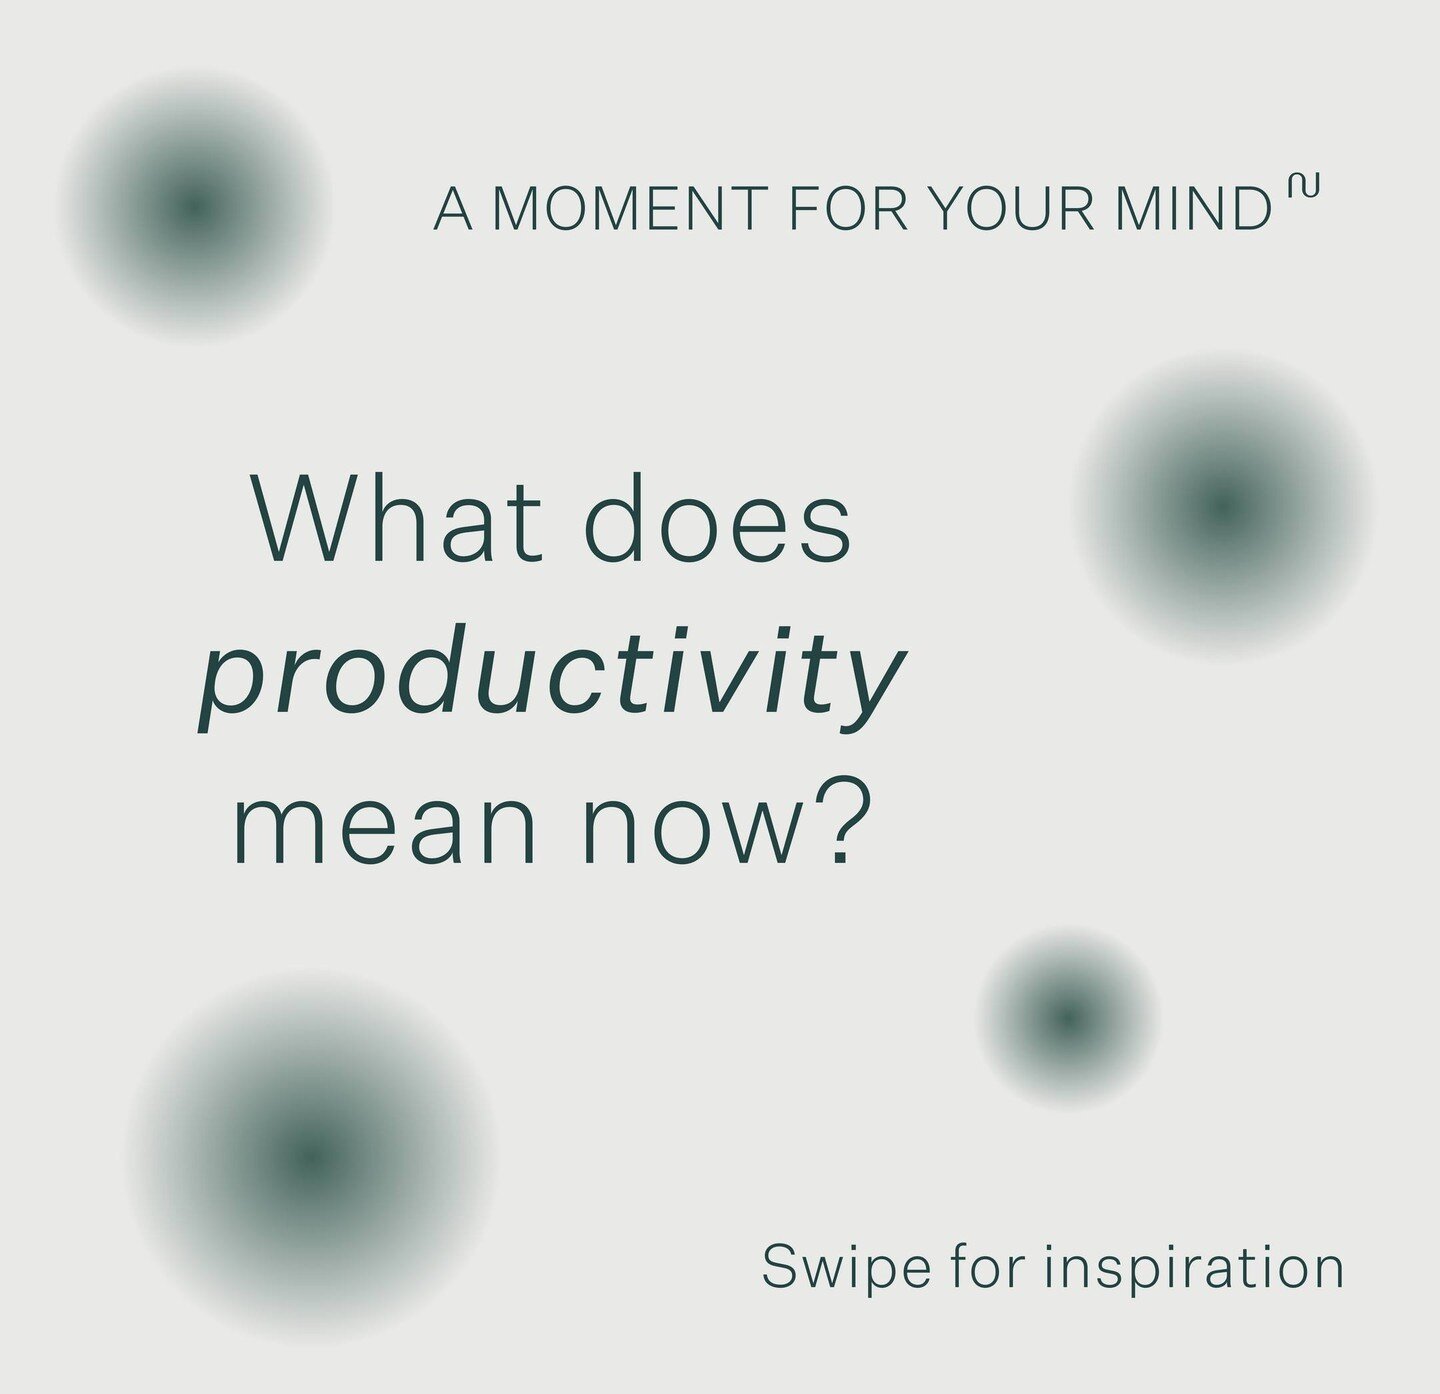 A Moment for your Mind: Productivity⁠
⁠
Recreated from @foundher.community⁠
⁠
#thefutureofyou⁠
#productivity⁠
#mentalwellbeing⁠
#amomentforyourmind